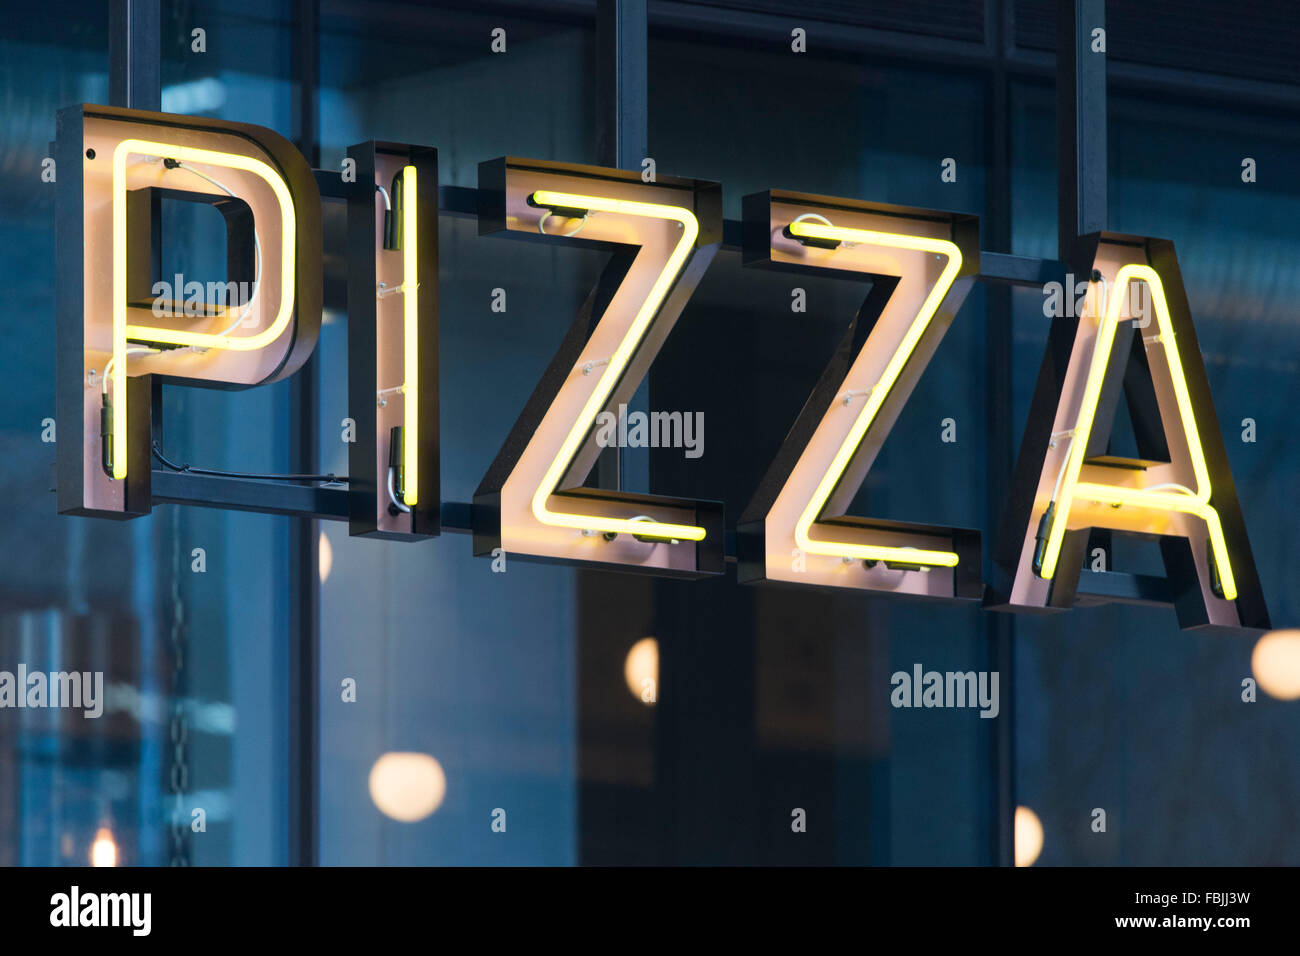 Pizza sign logo in fluorescent lights. Stock Photo